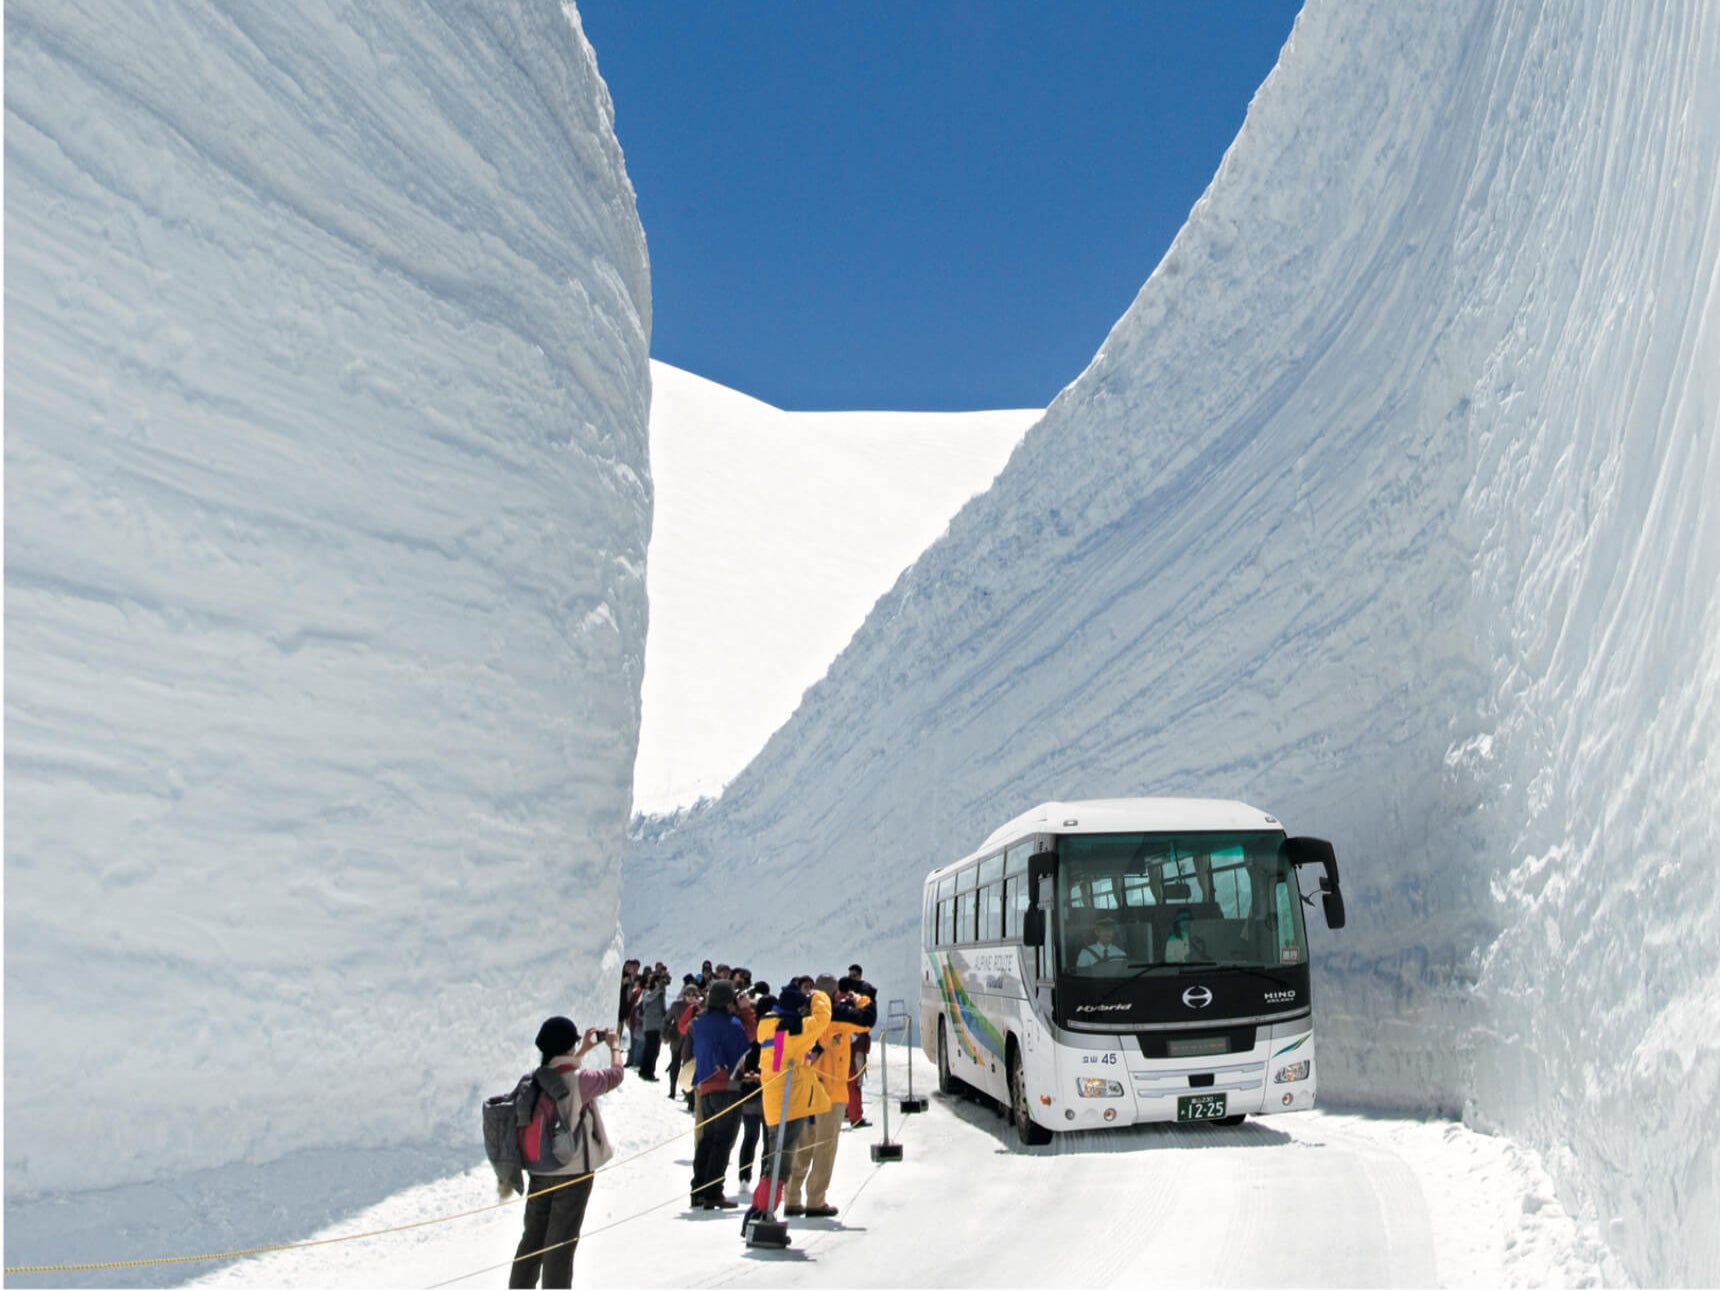 The snow corridor is only open for two months